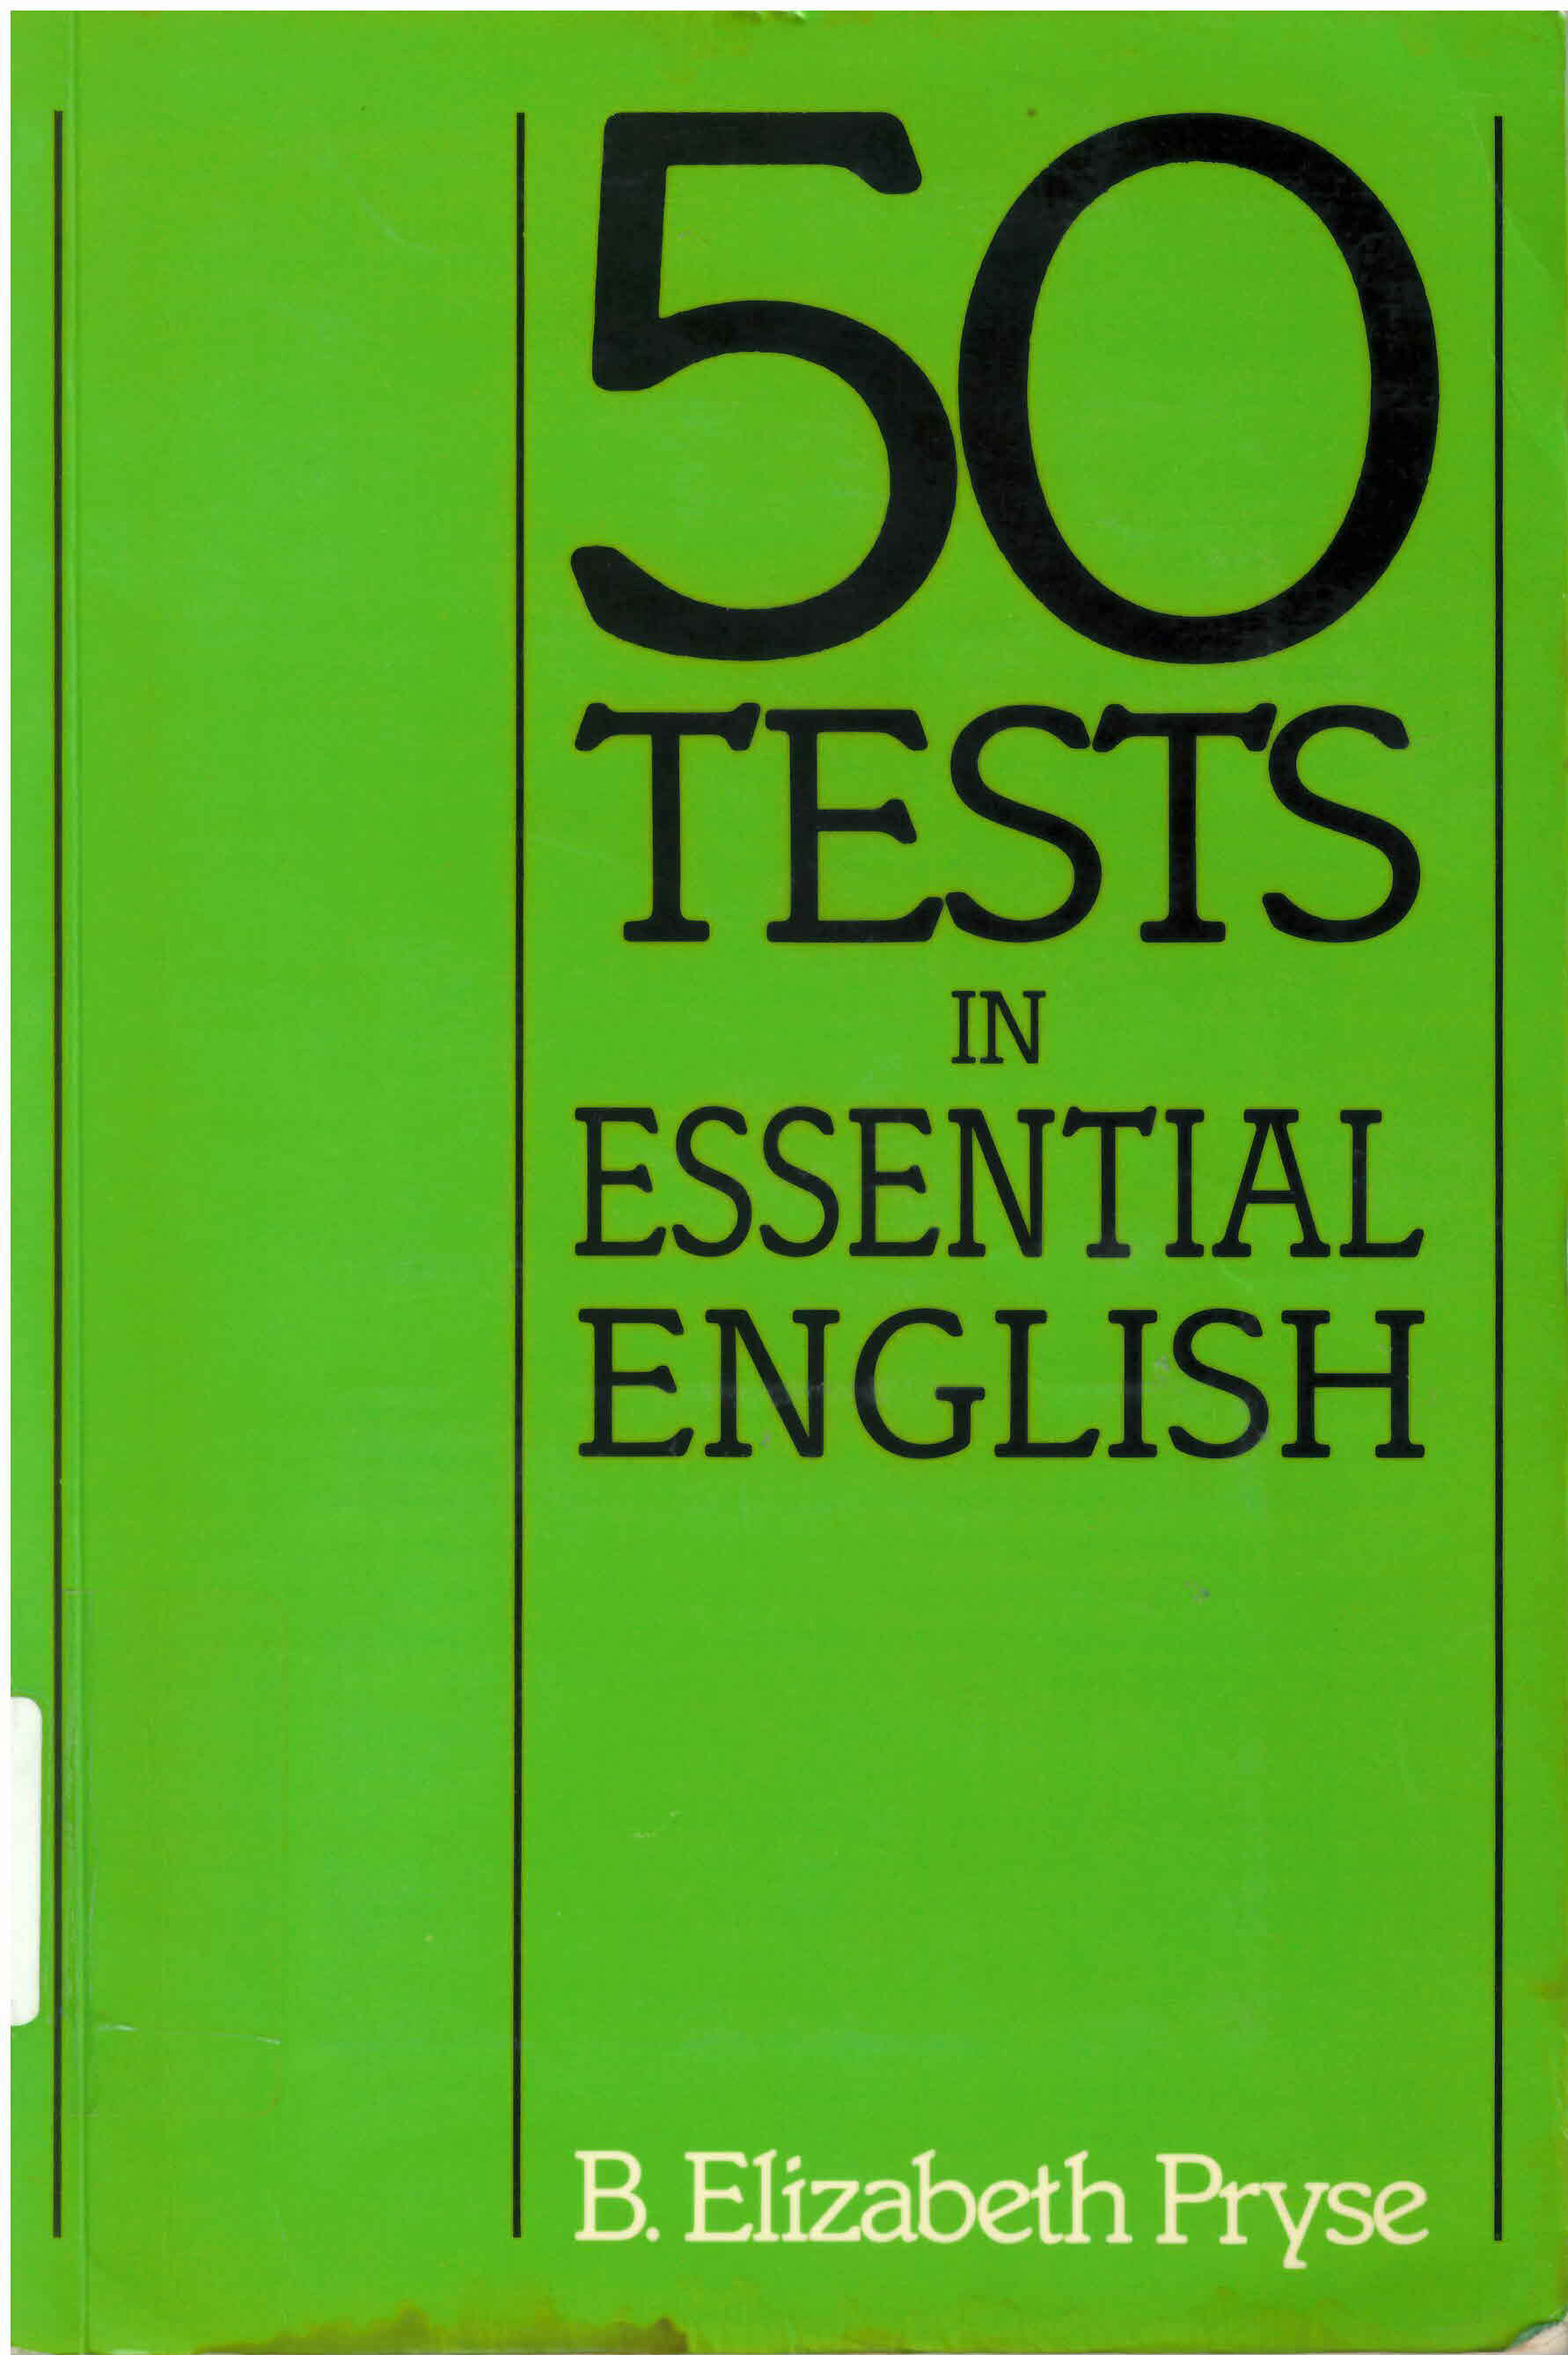 Fifty tests in essential English